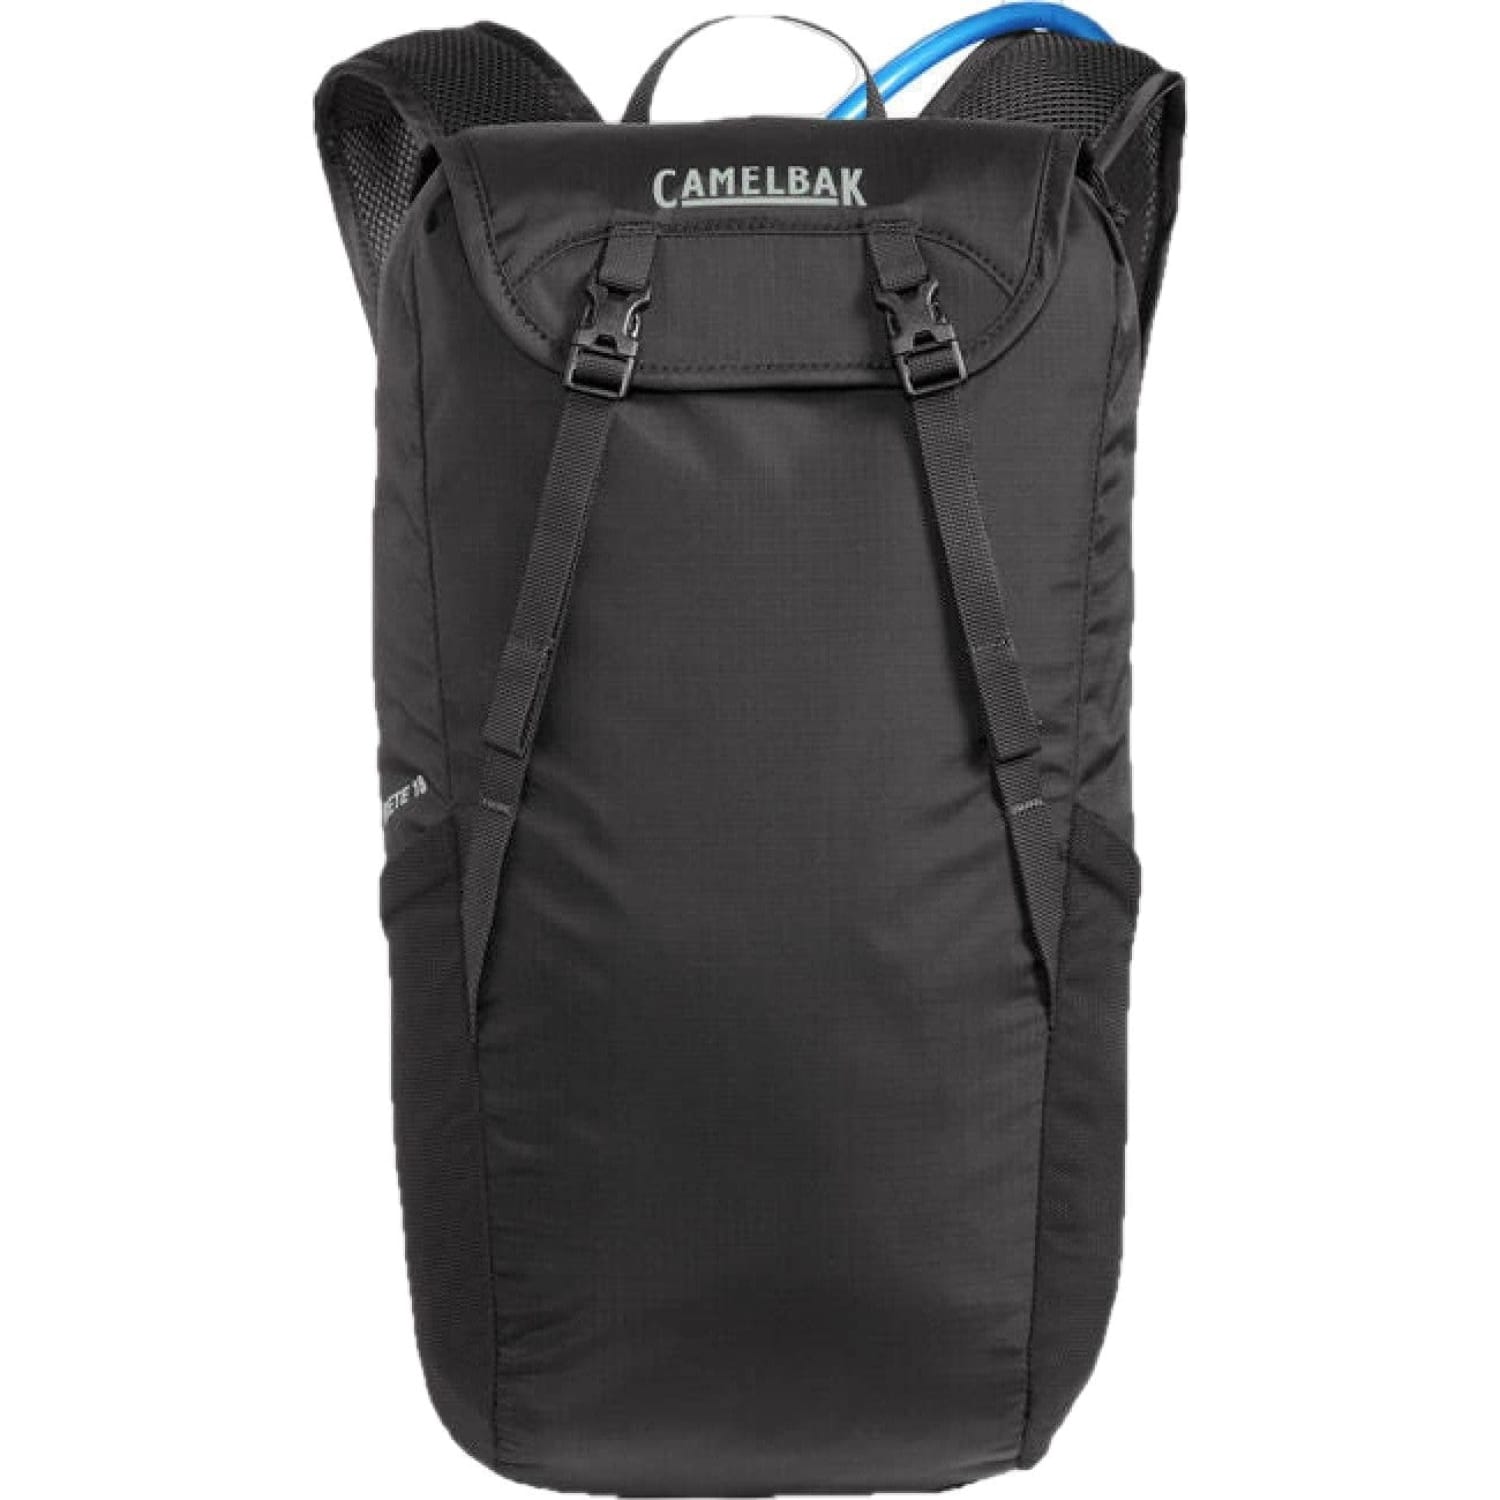 Camelbak Arete™ 18 Hydration Pack 50 oz, Black Reflective, front view 